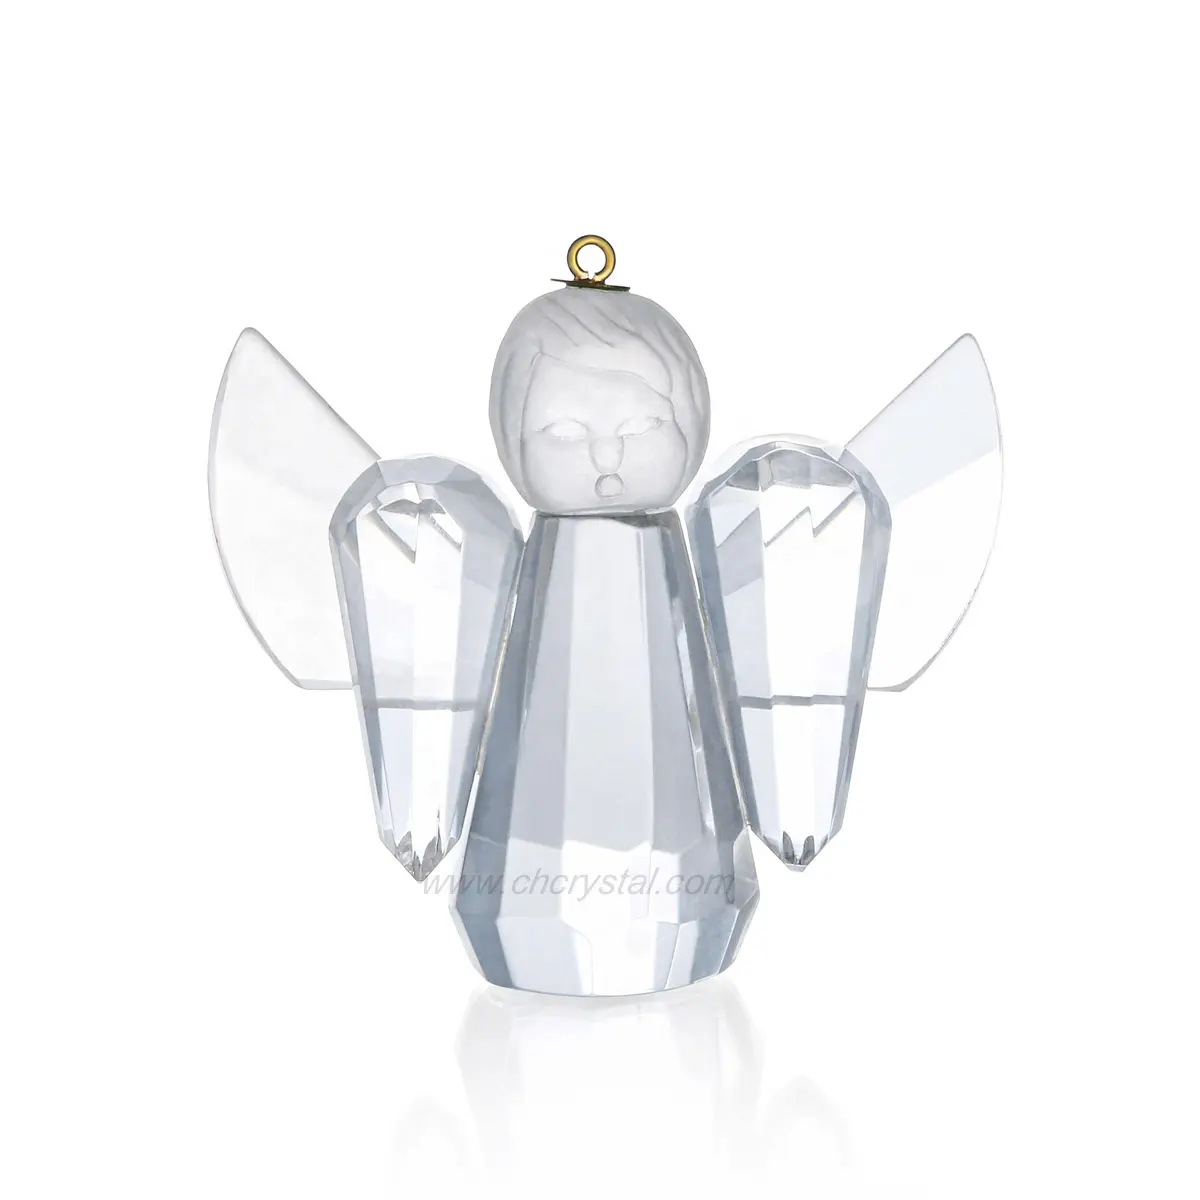 Short elegant lovely angel crystal crafts kids shower gifts glass angle figurines Christmas gift items for home decoration